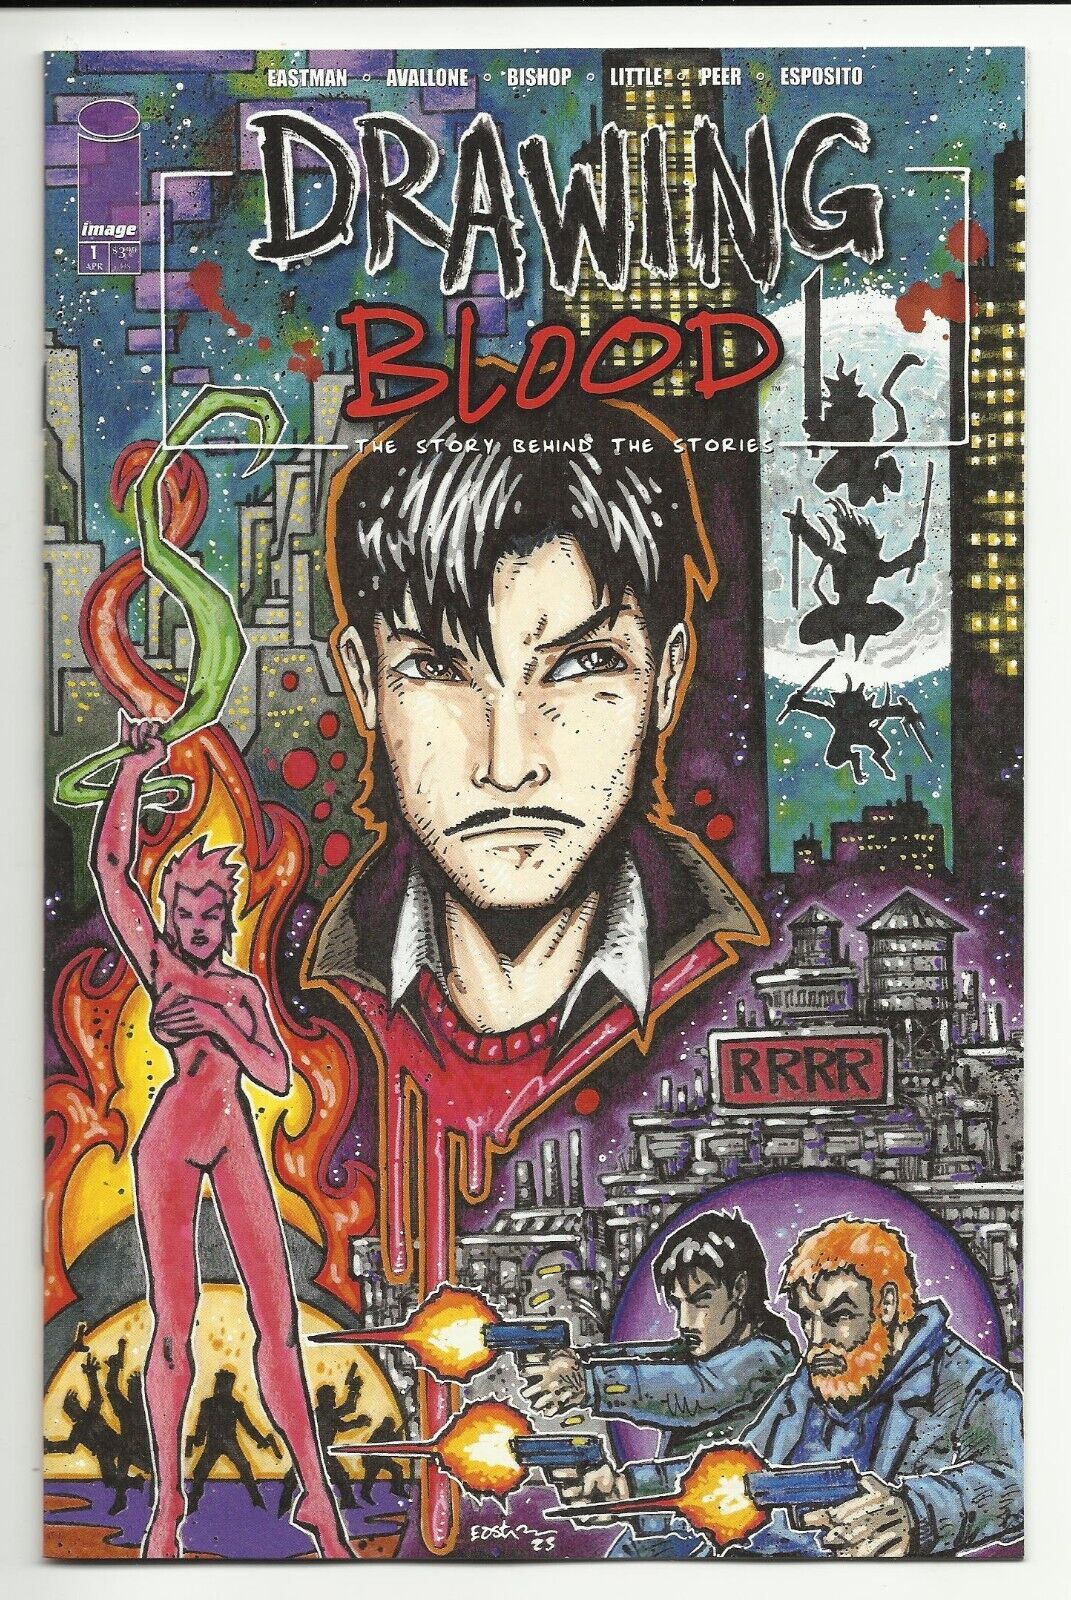 Drawing Blood #1 - Cover A by Kevin Eastman - Image series - NM 9.4